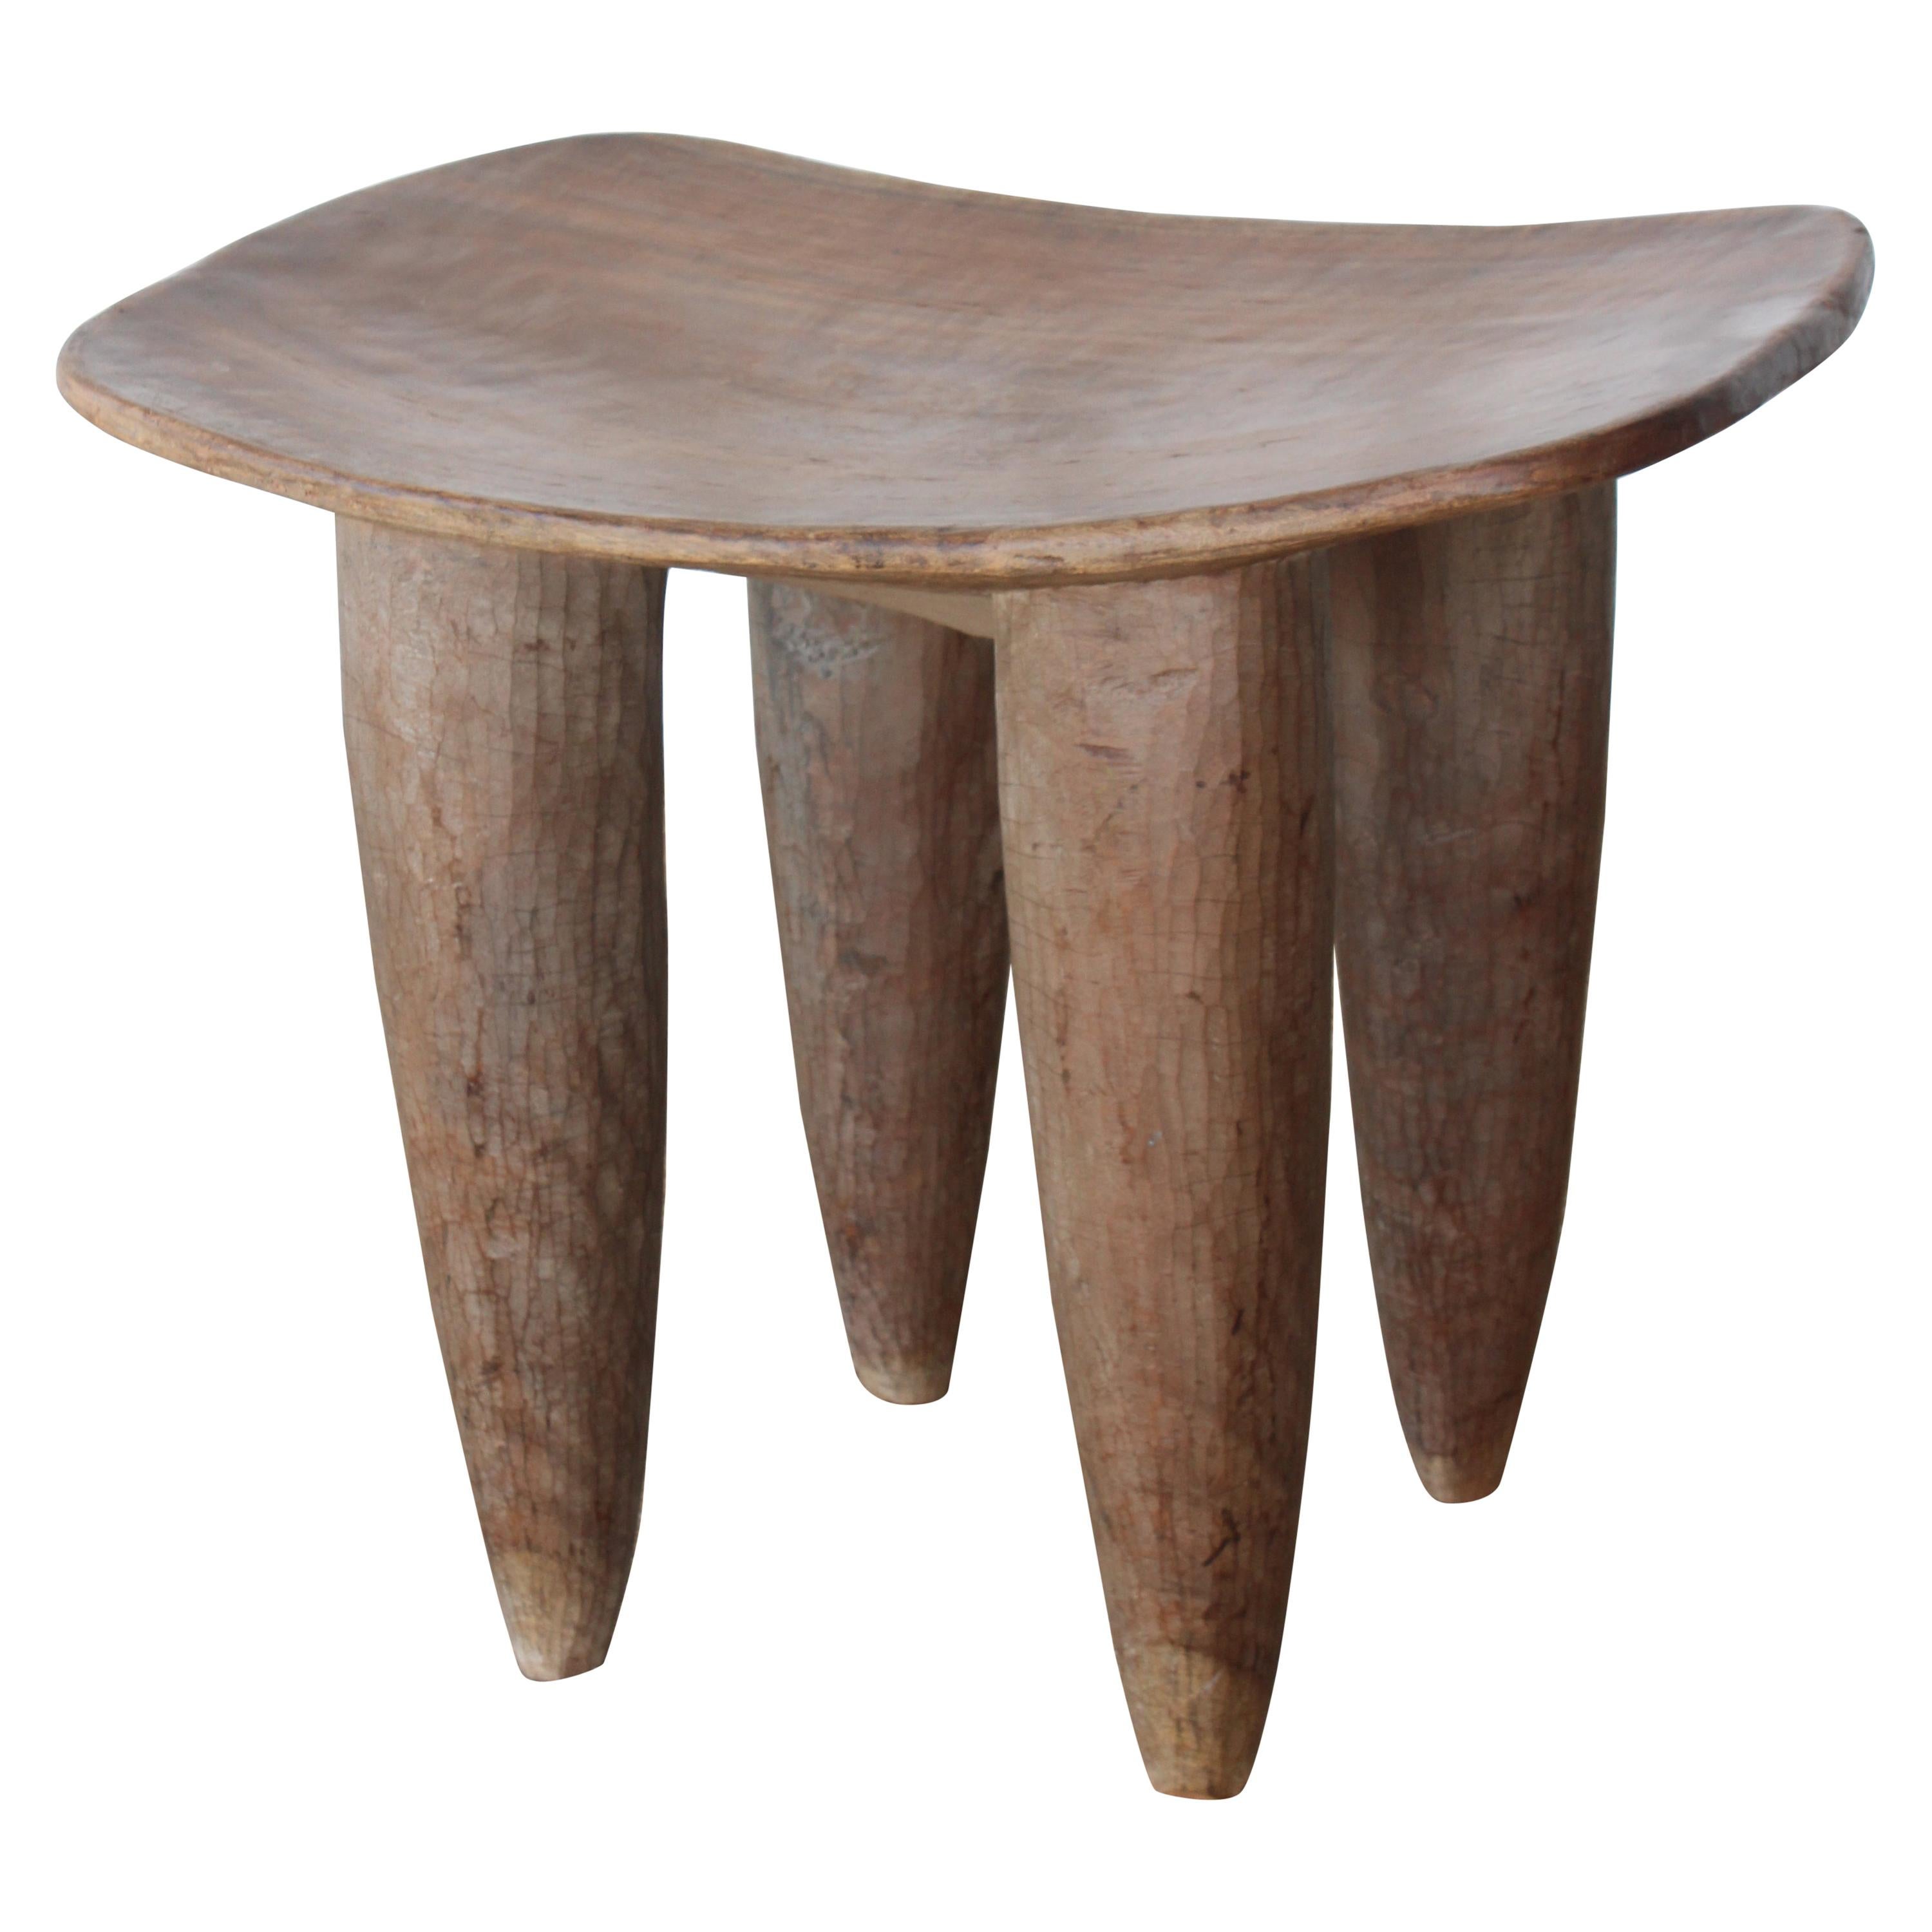 Vintage African Senufo Table, Coite d'Ivoire, Mid 20th Century